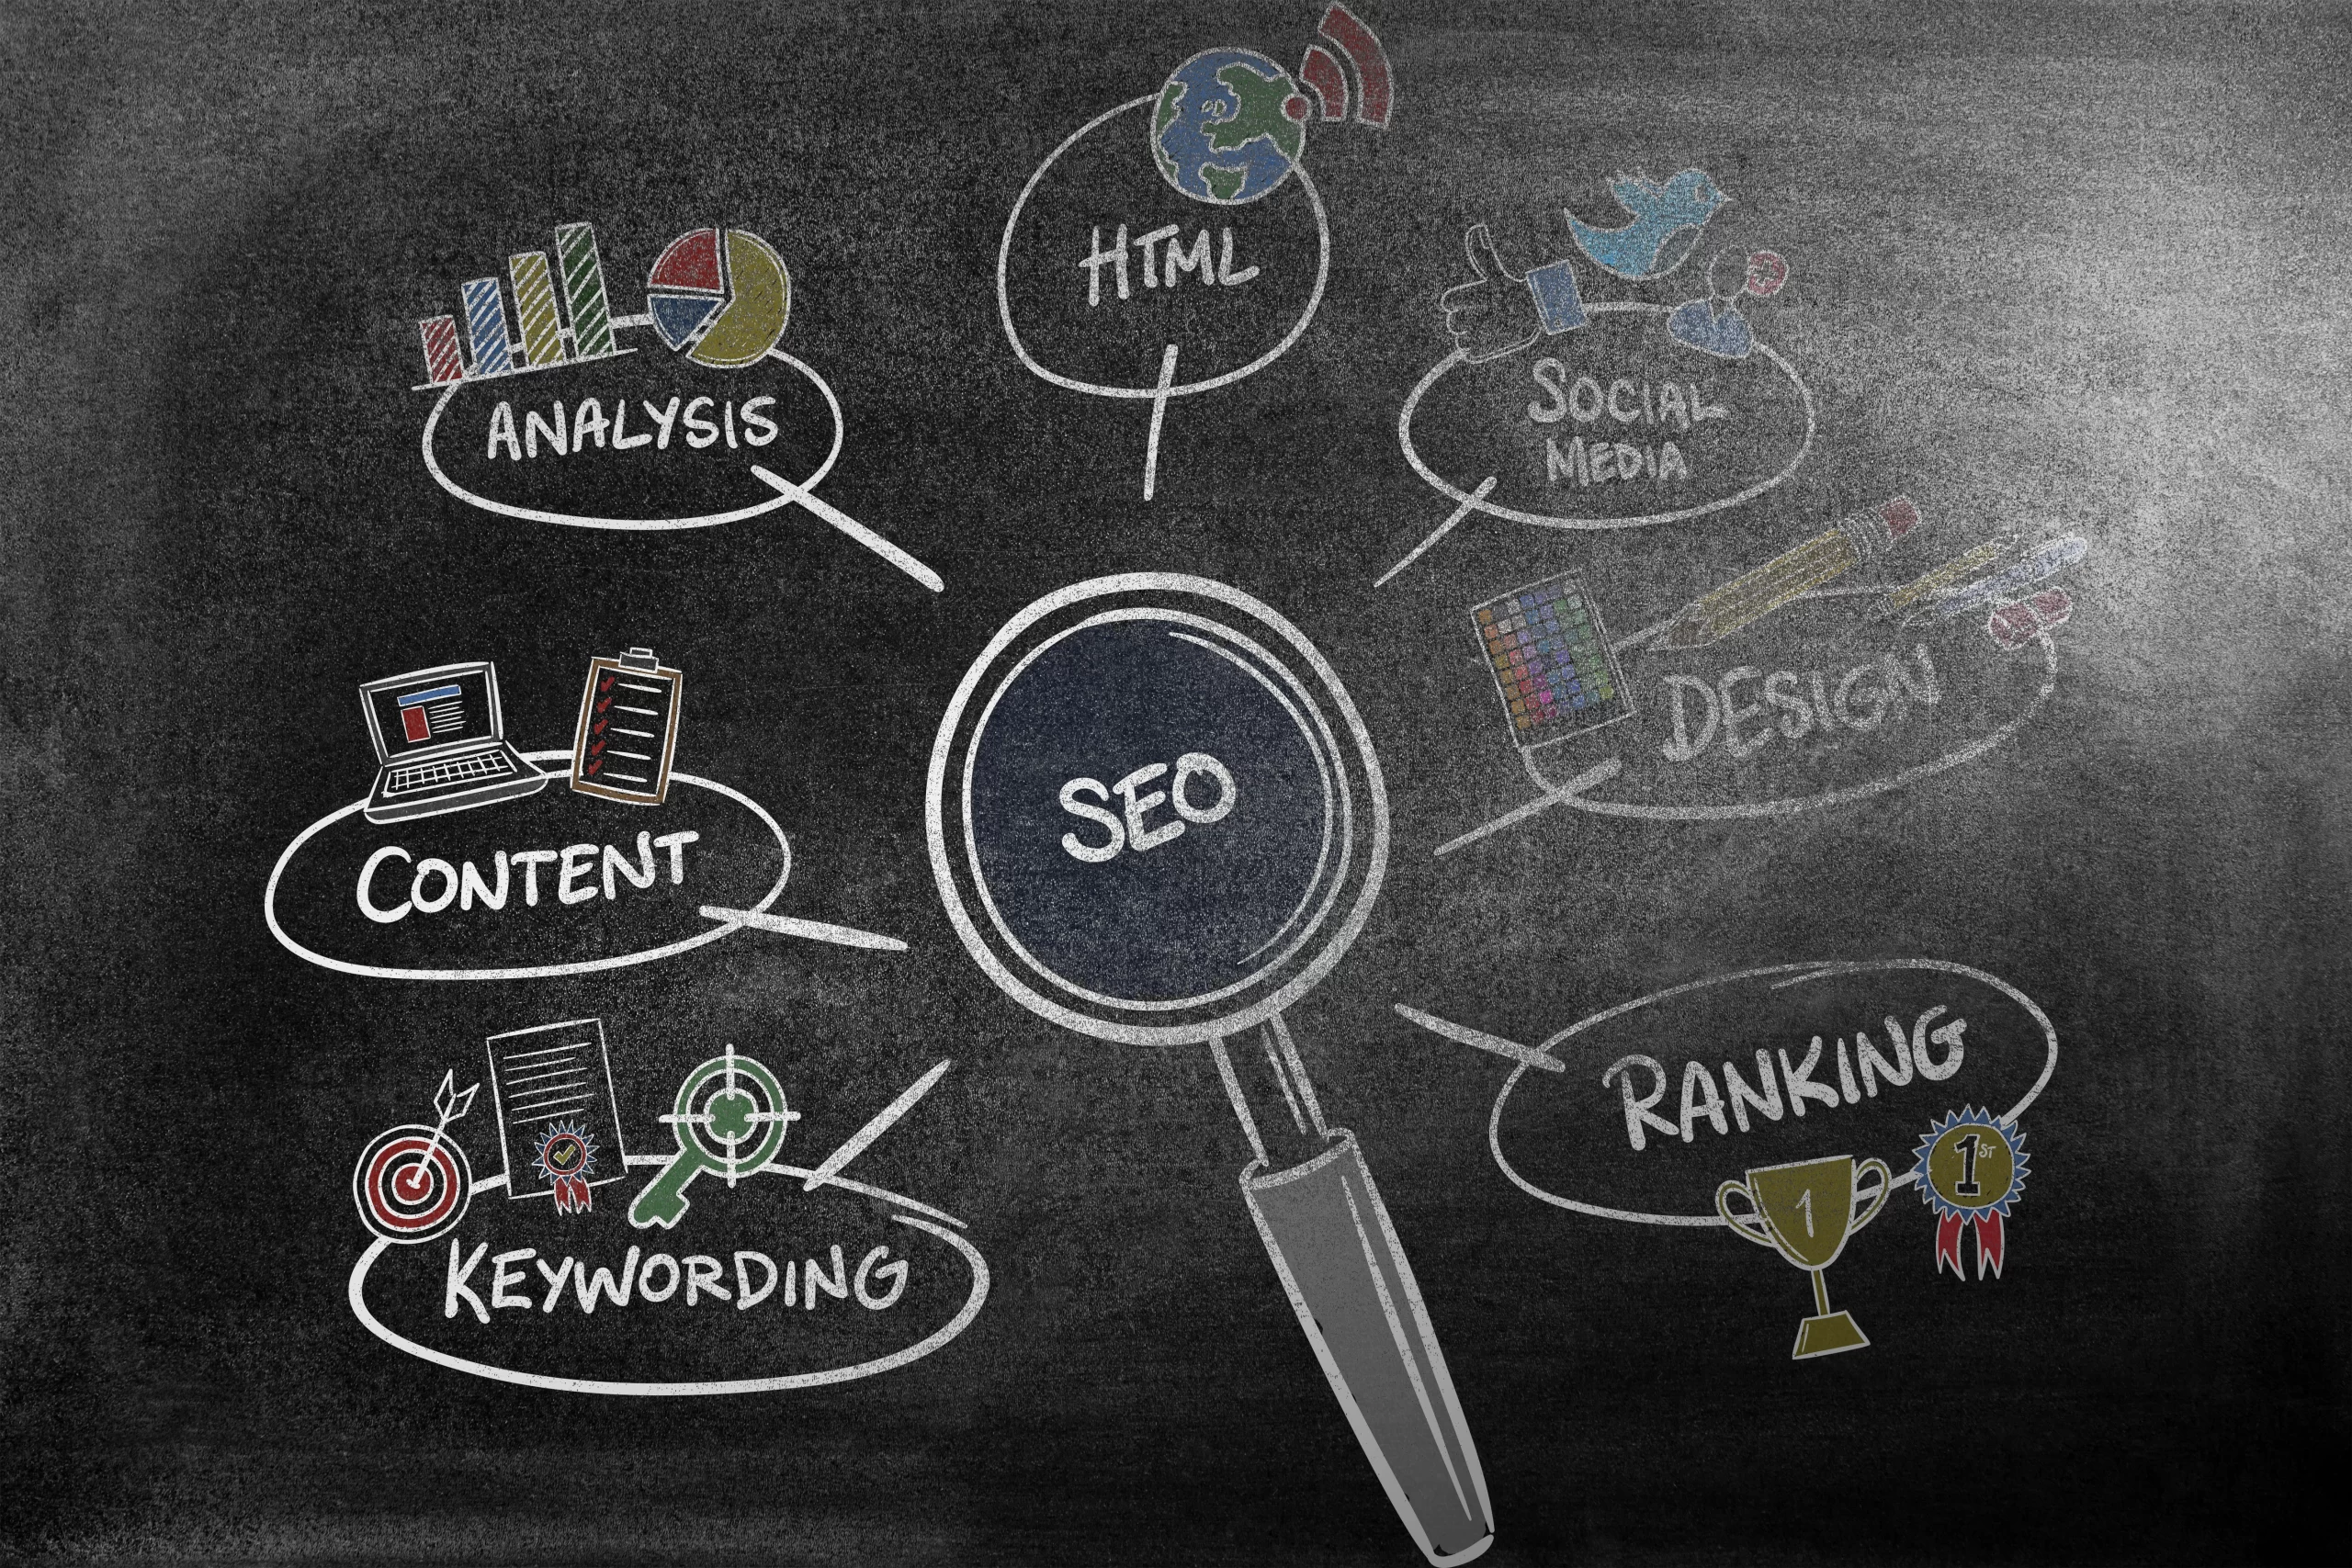 Elements that would go into an SEO package outlined on a chalk board